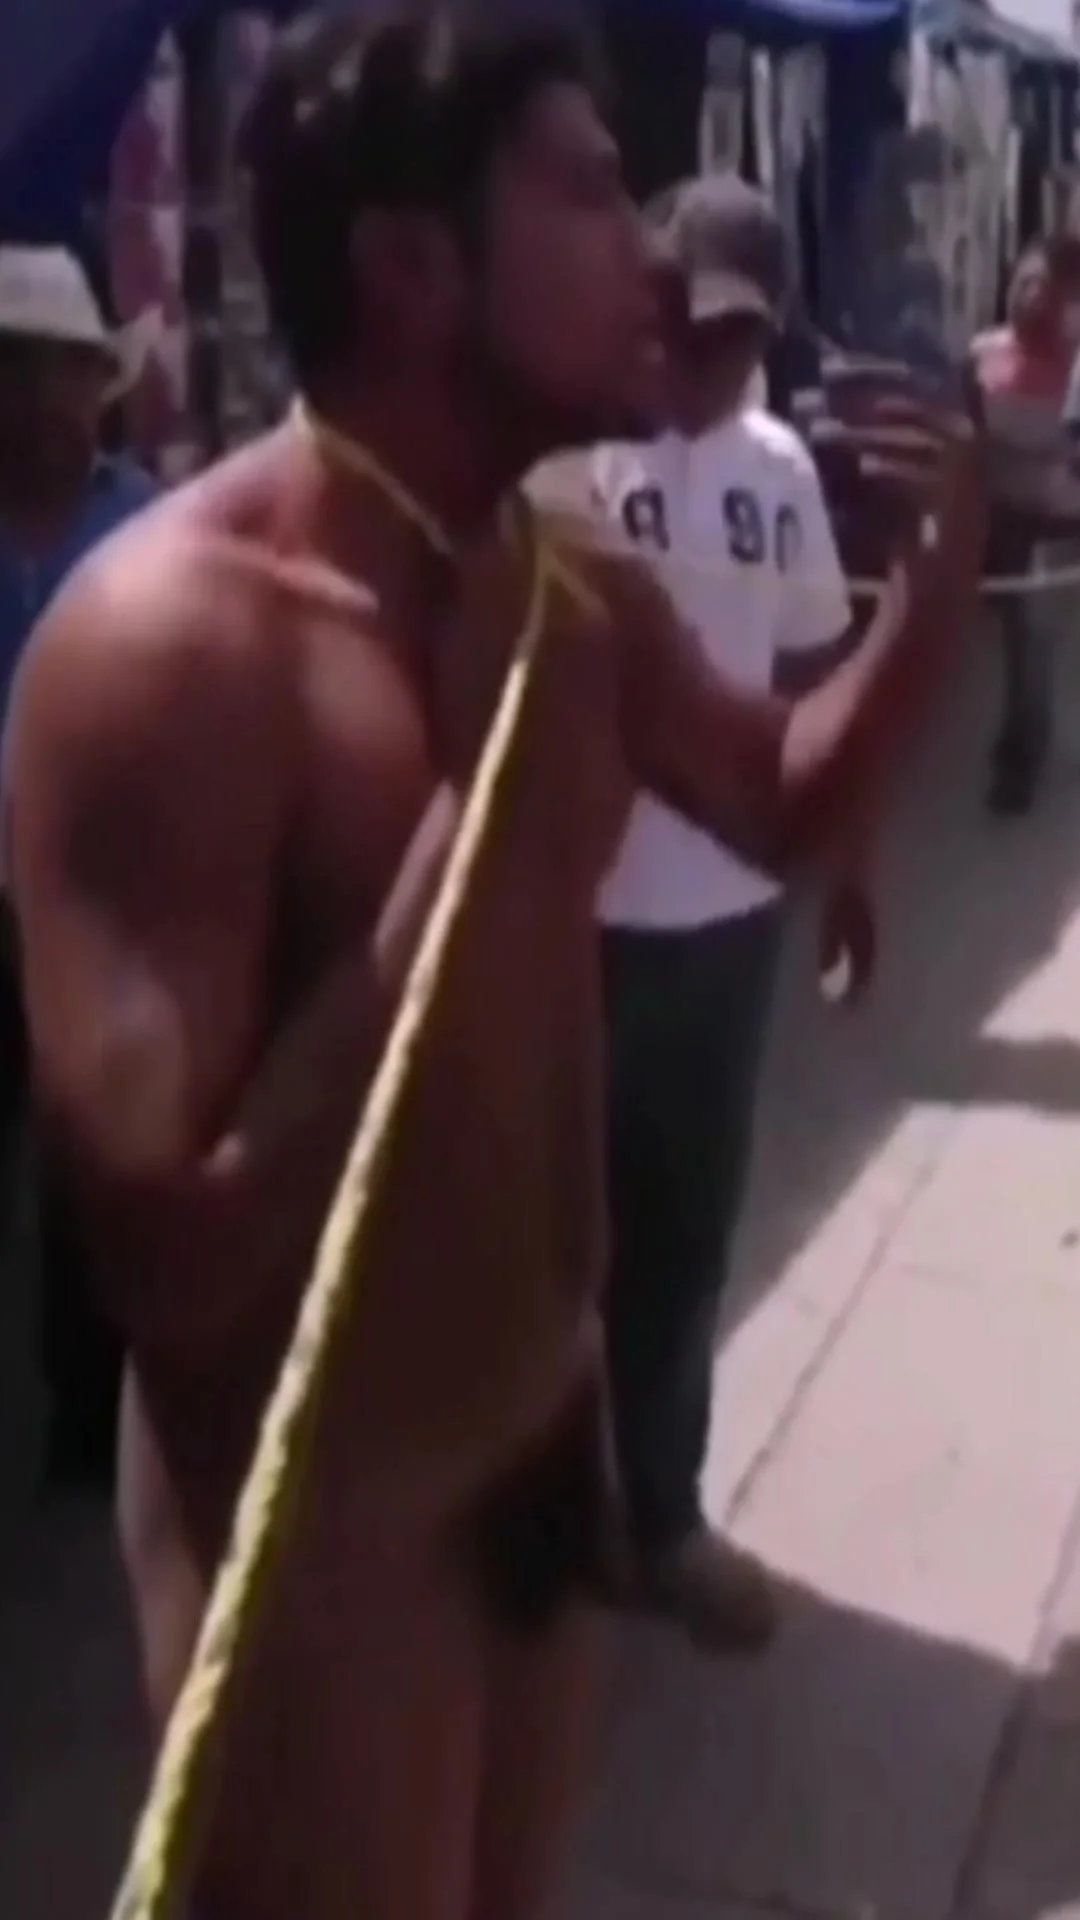 Stripped Naked Muscle Thief Stripped In Public Thisvid Com